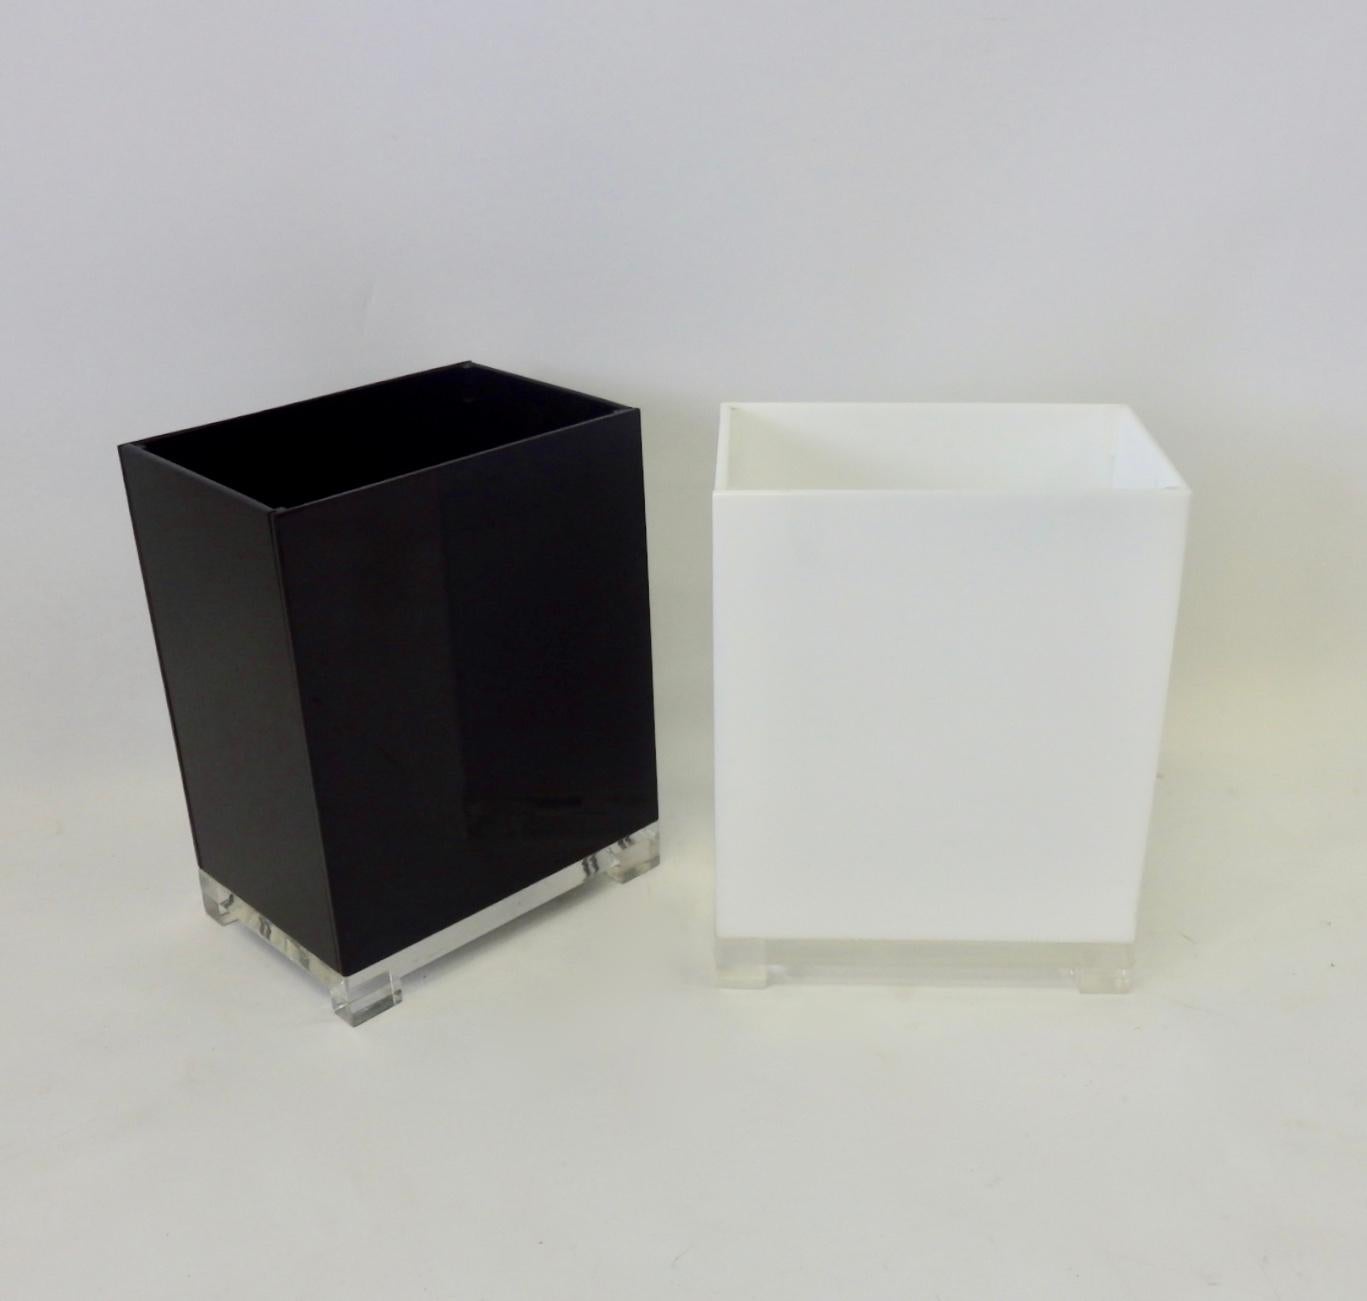 Pair of Lucite trash cans one black one white. Excellent condition.